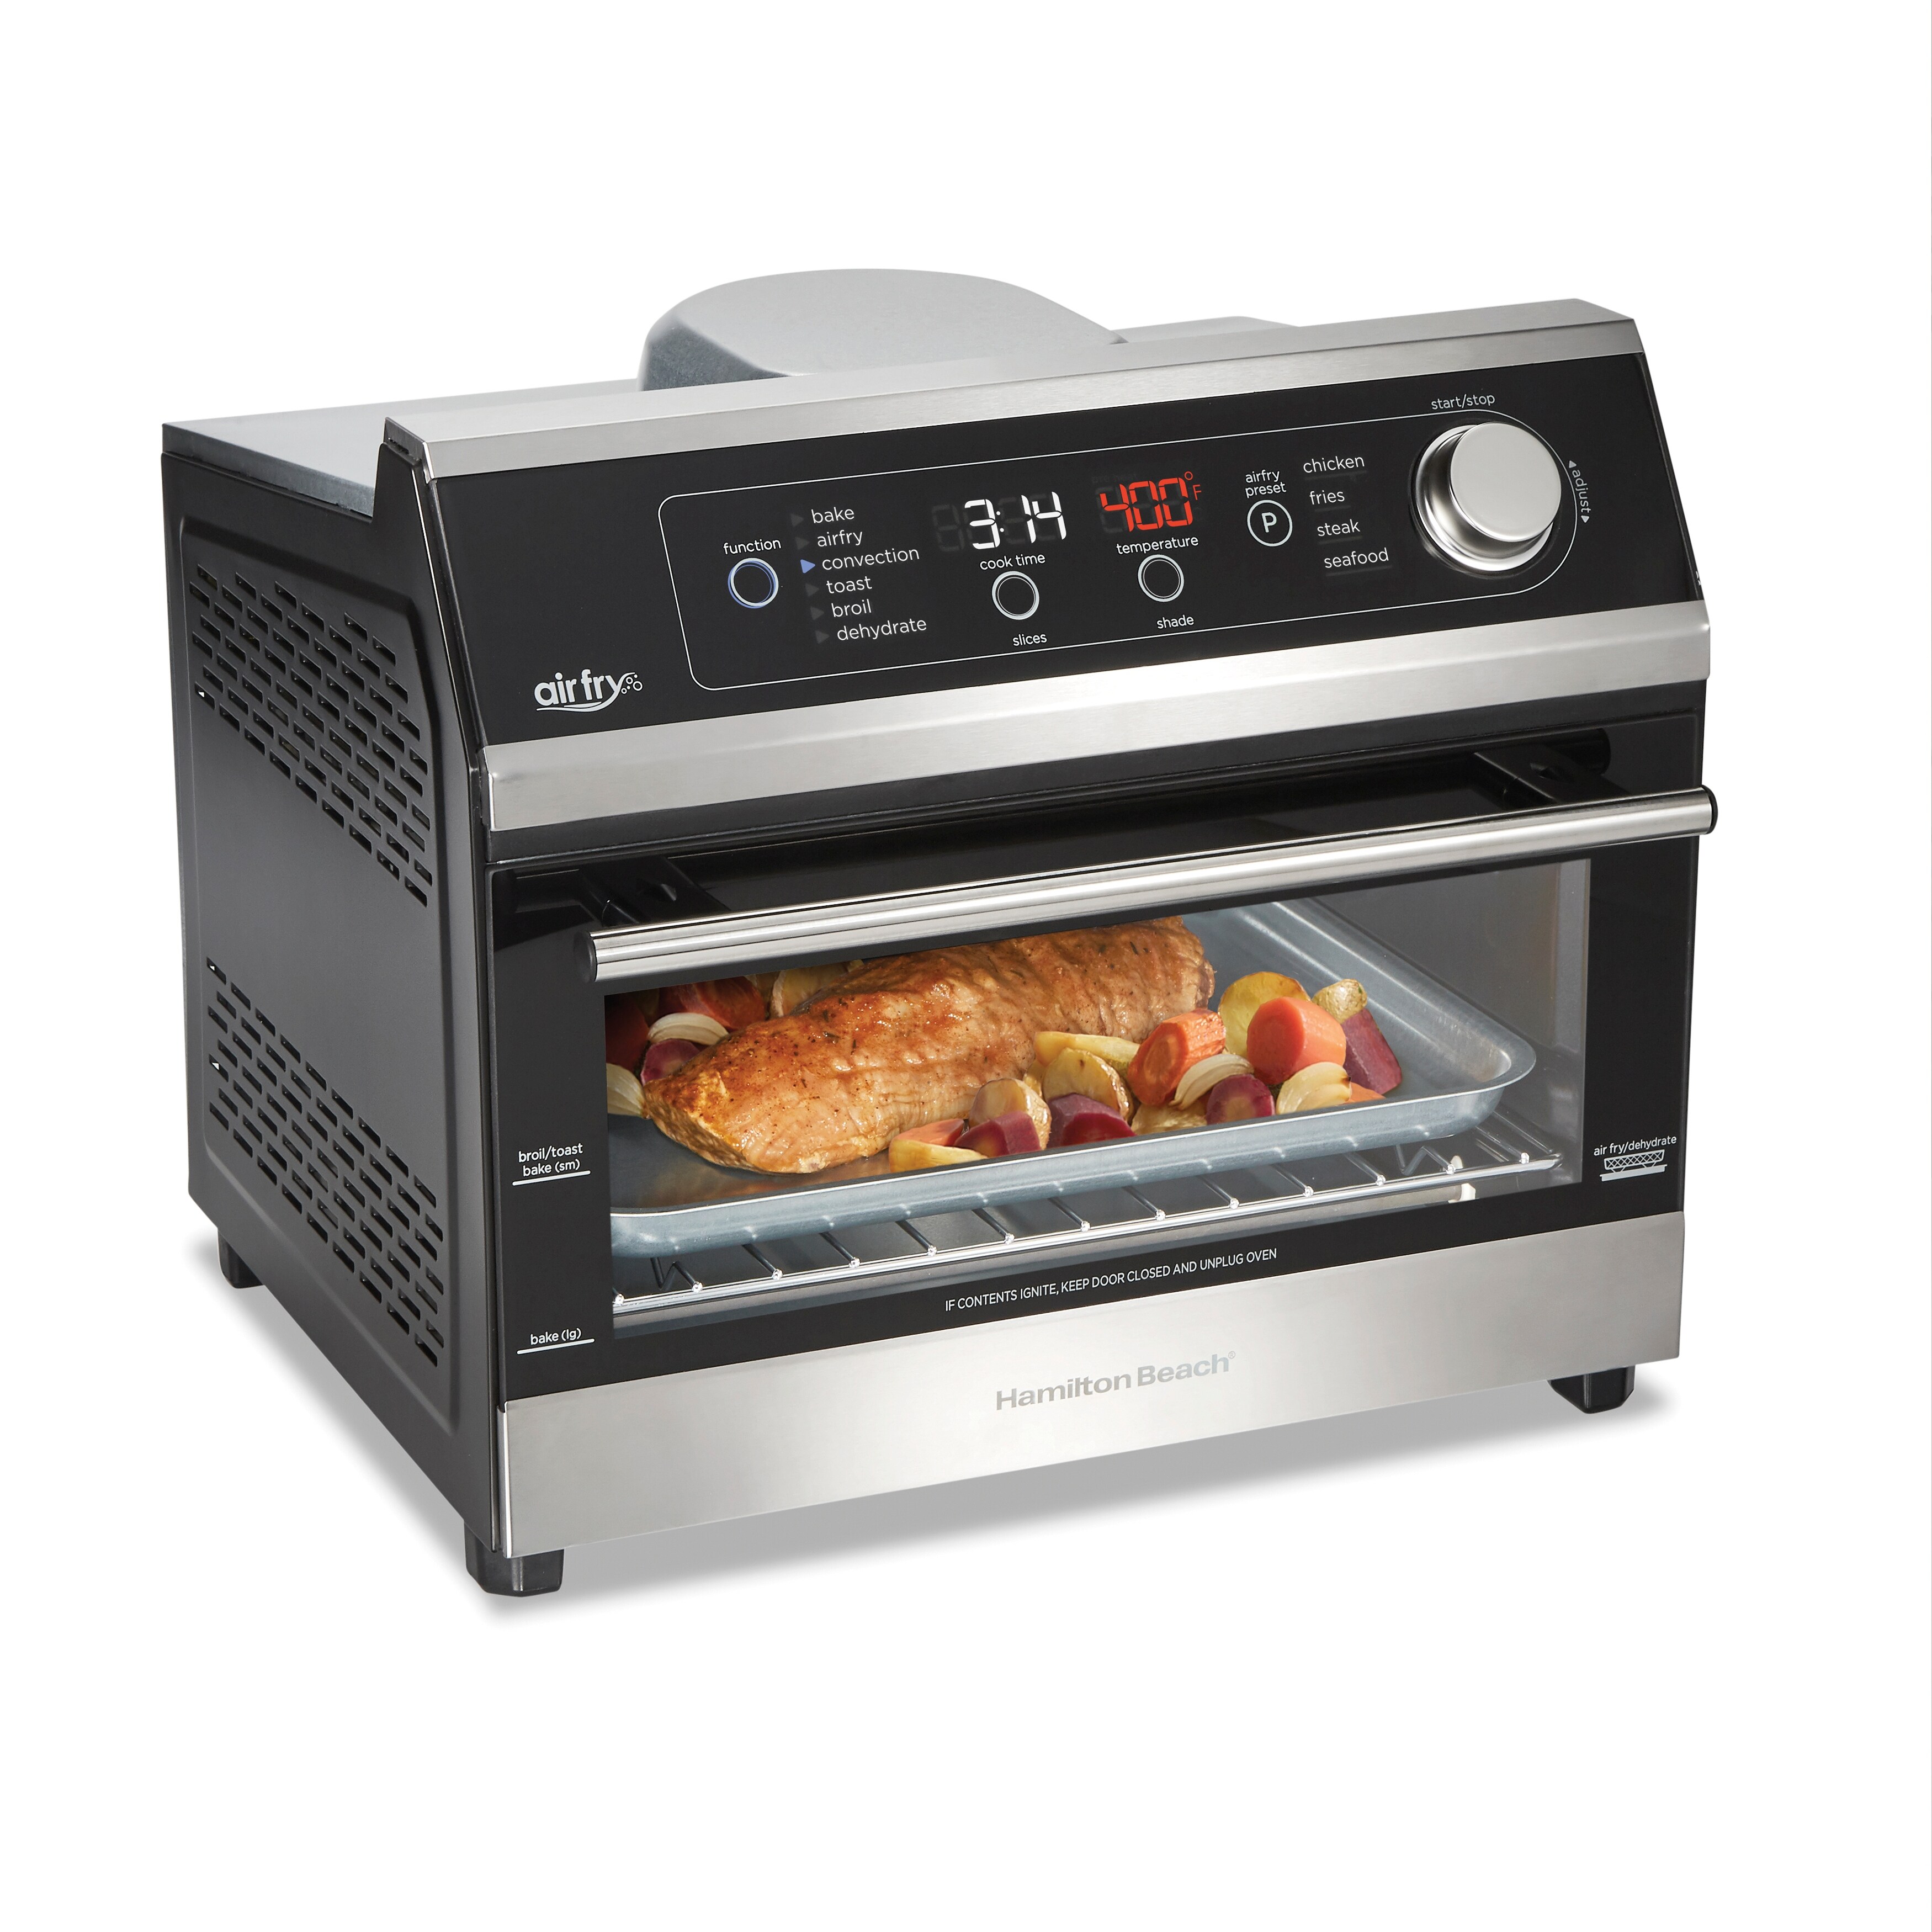 https://ak1.ostkcdn.com/images/products/is/images/direct/abd92c86d7b4a54e8df6c8bd92130ba4decc6668/Air-Fryer-Toaster-Oven%2C-6-Slice-Capacity%2C-Black-with-Stainless-Steel-Accents%2C-Model-31220.jpg